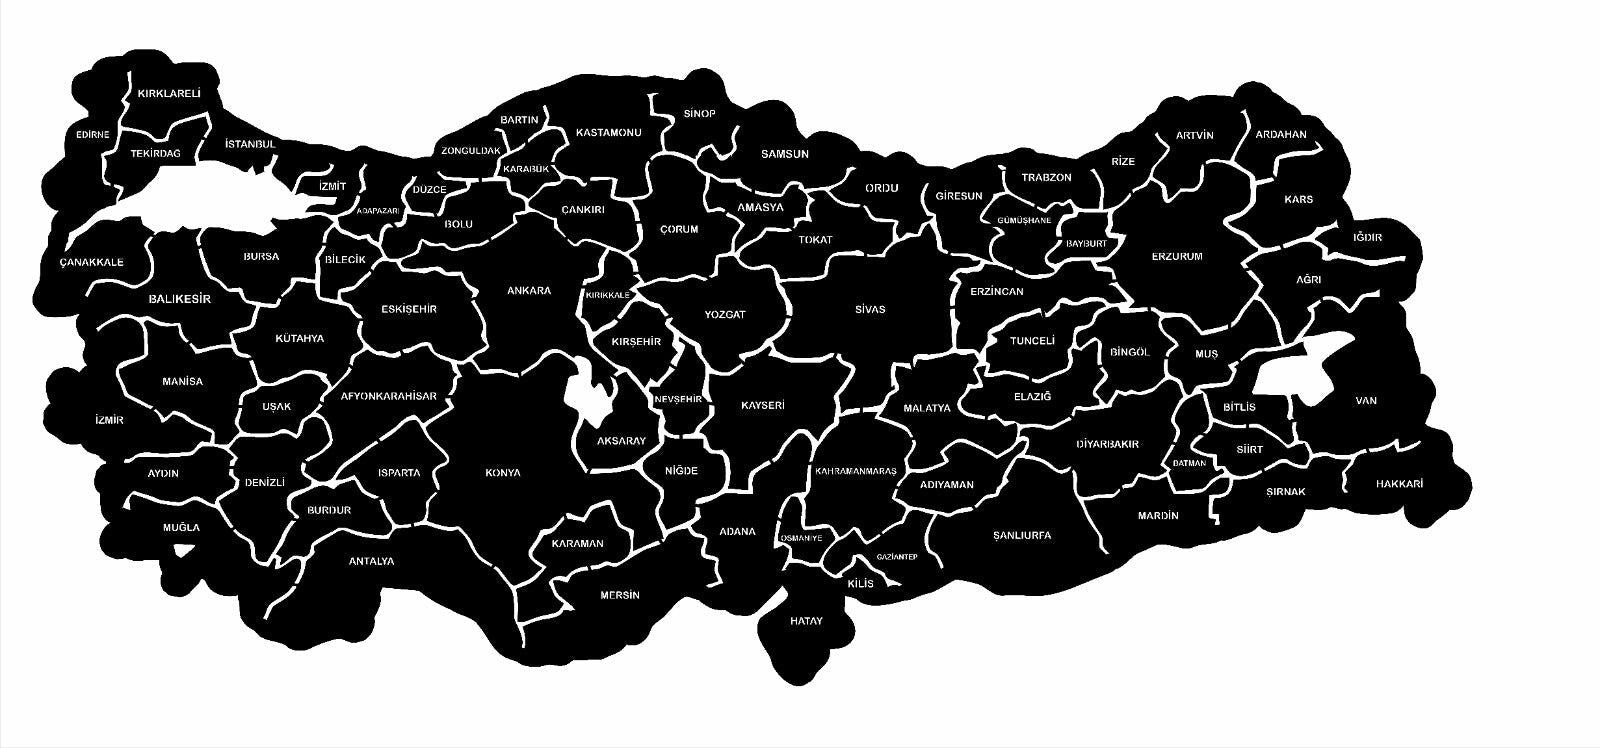 Turkey Map with City Name